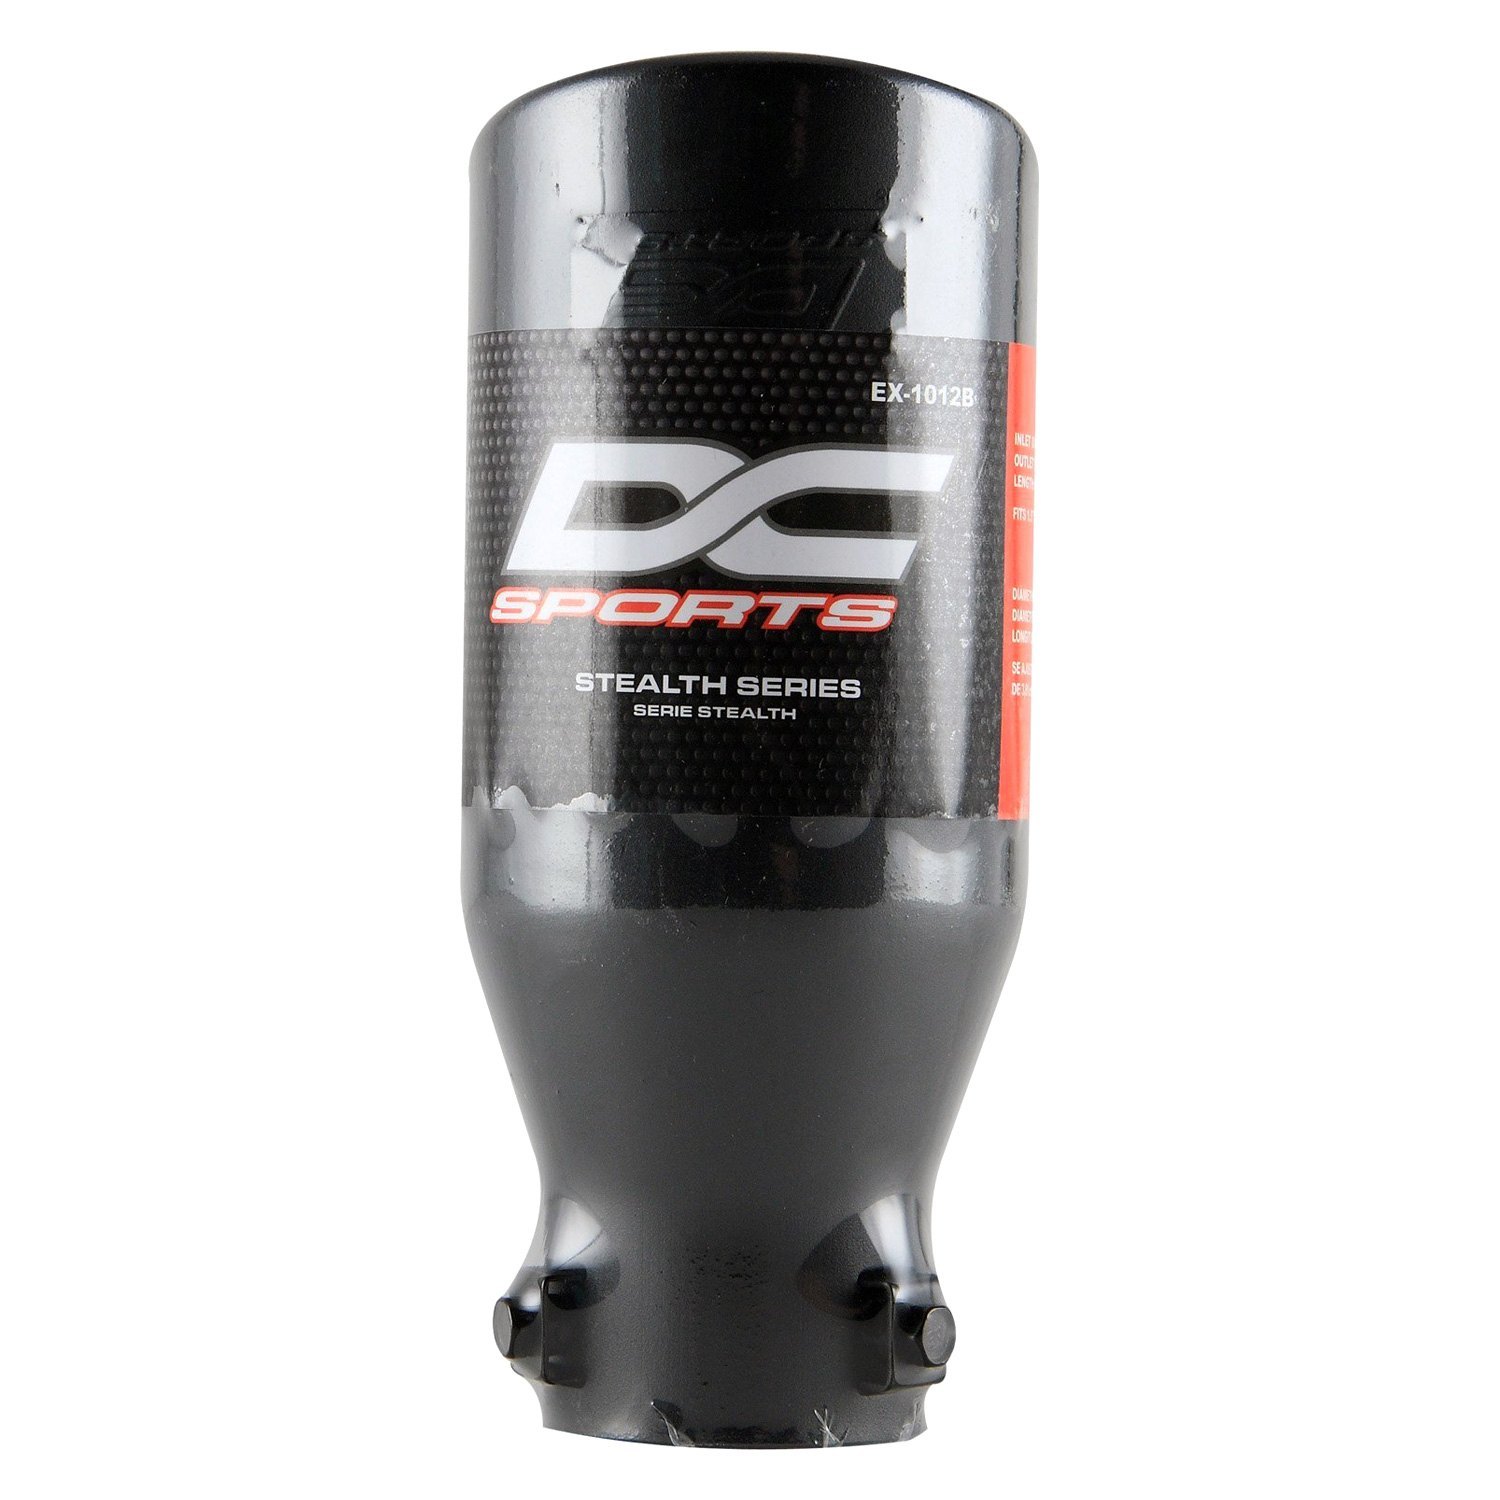 DC Sports® EX-1012B - Stainless Steel Round Resonated Angle Cut Bolt-On Dc Sports Stainless Steel Exhaust Tip